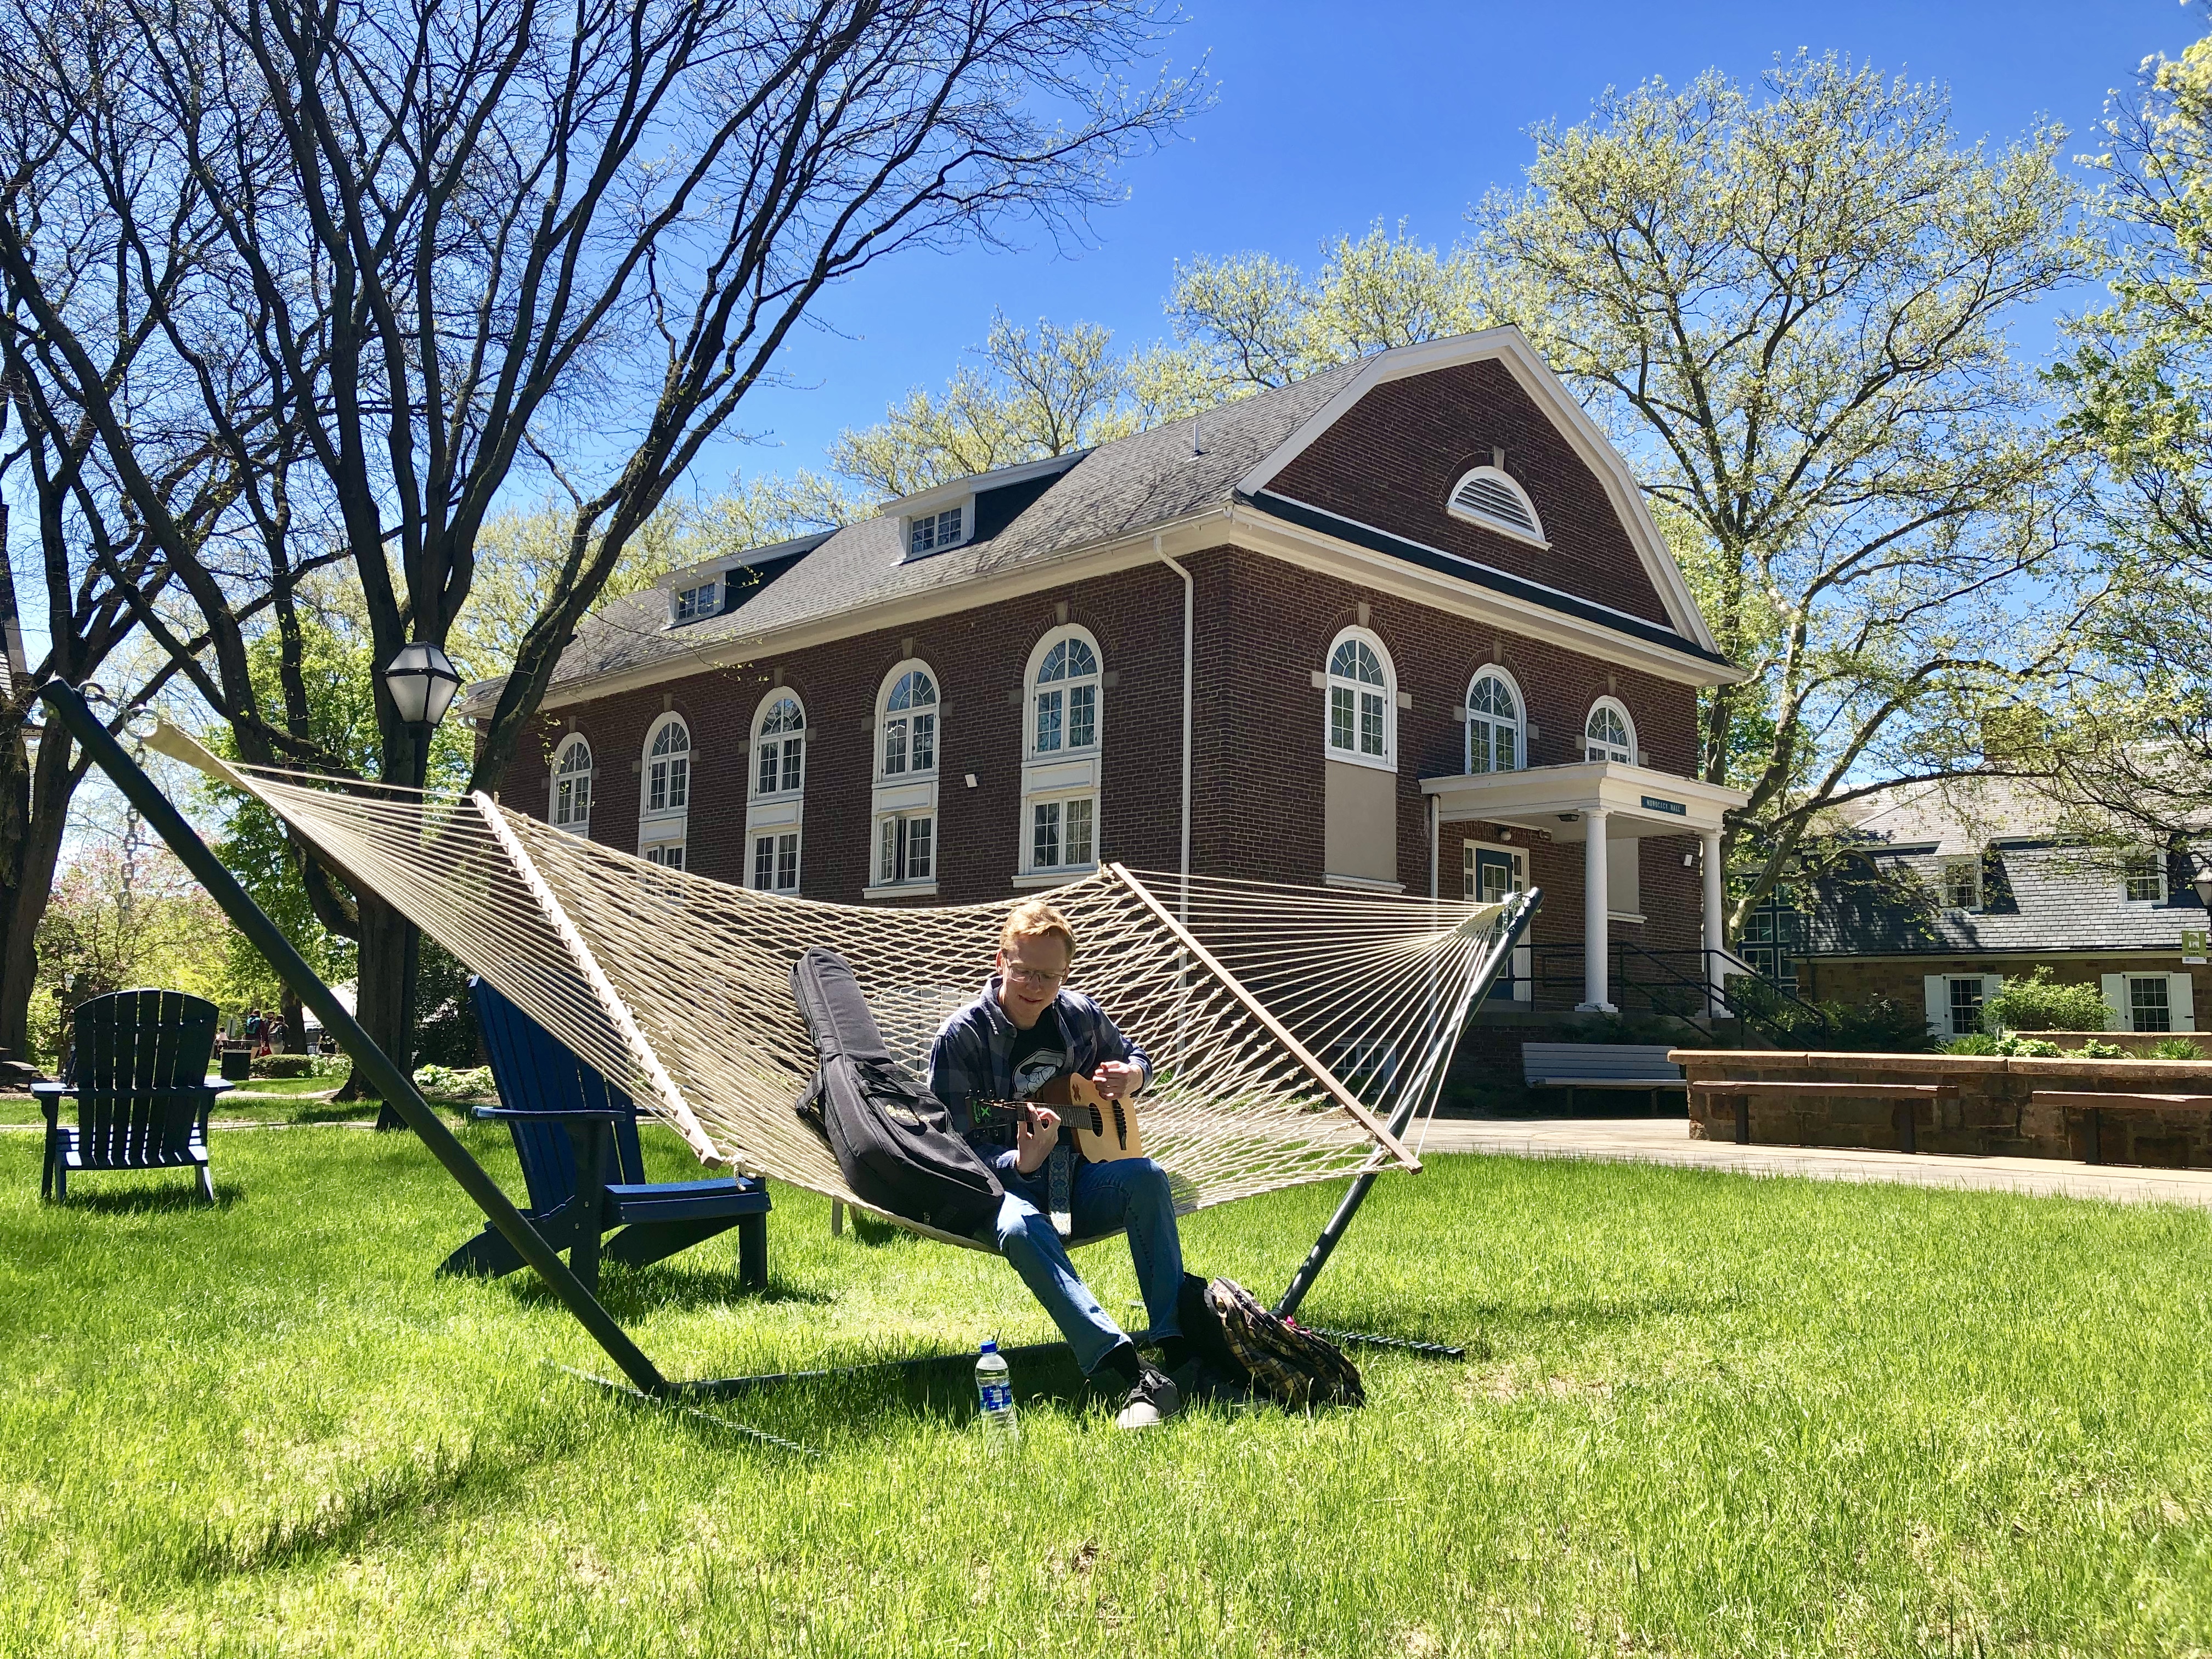 A male student sits on a hammock outside in the quad between 3 campus buildings. A flowering white dogwood tree appear above the roofline of the building behind him. The grass is green.